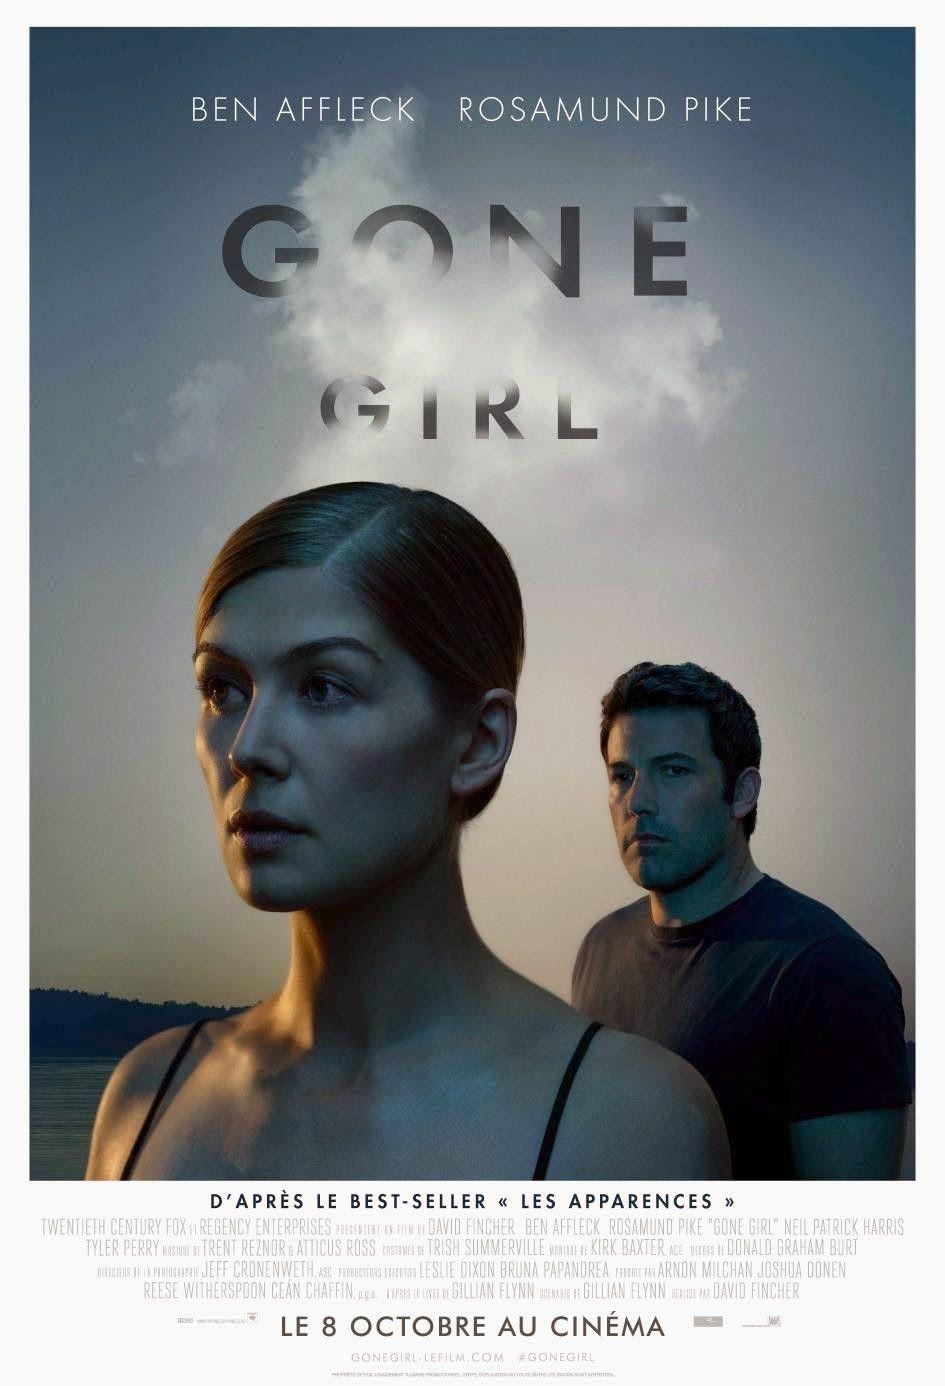 Shy Way: Love It Or Leave It: Gone Girl: A Nice Thriller!